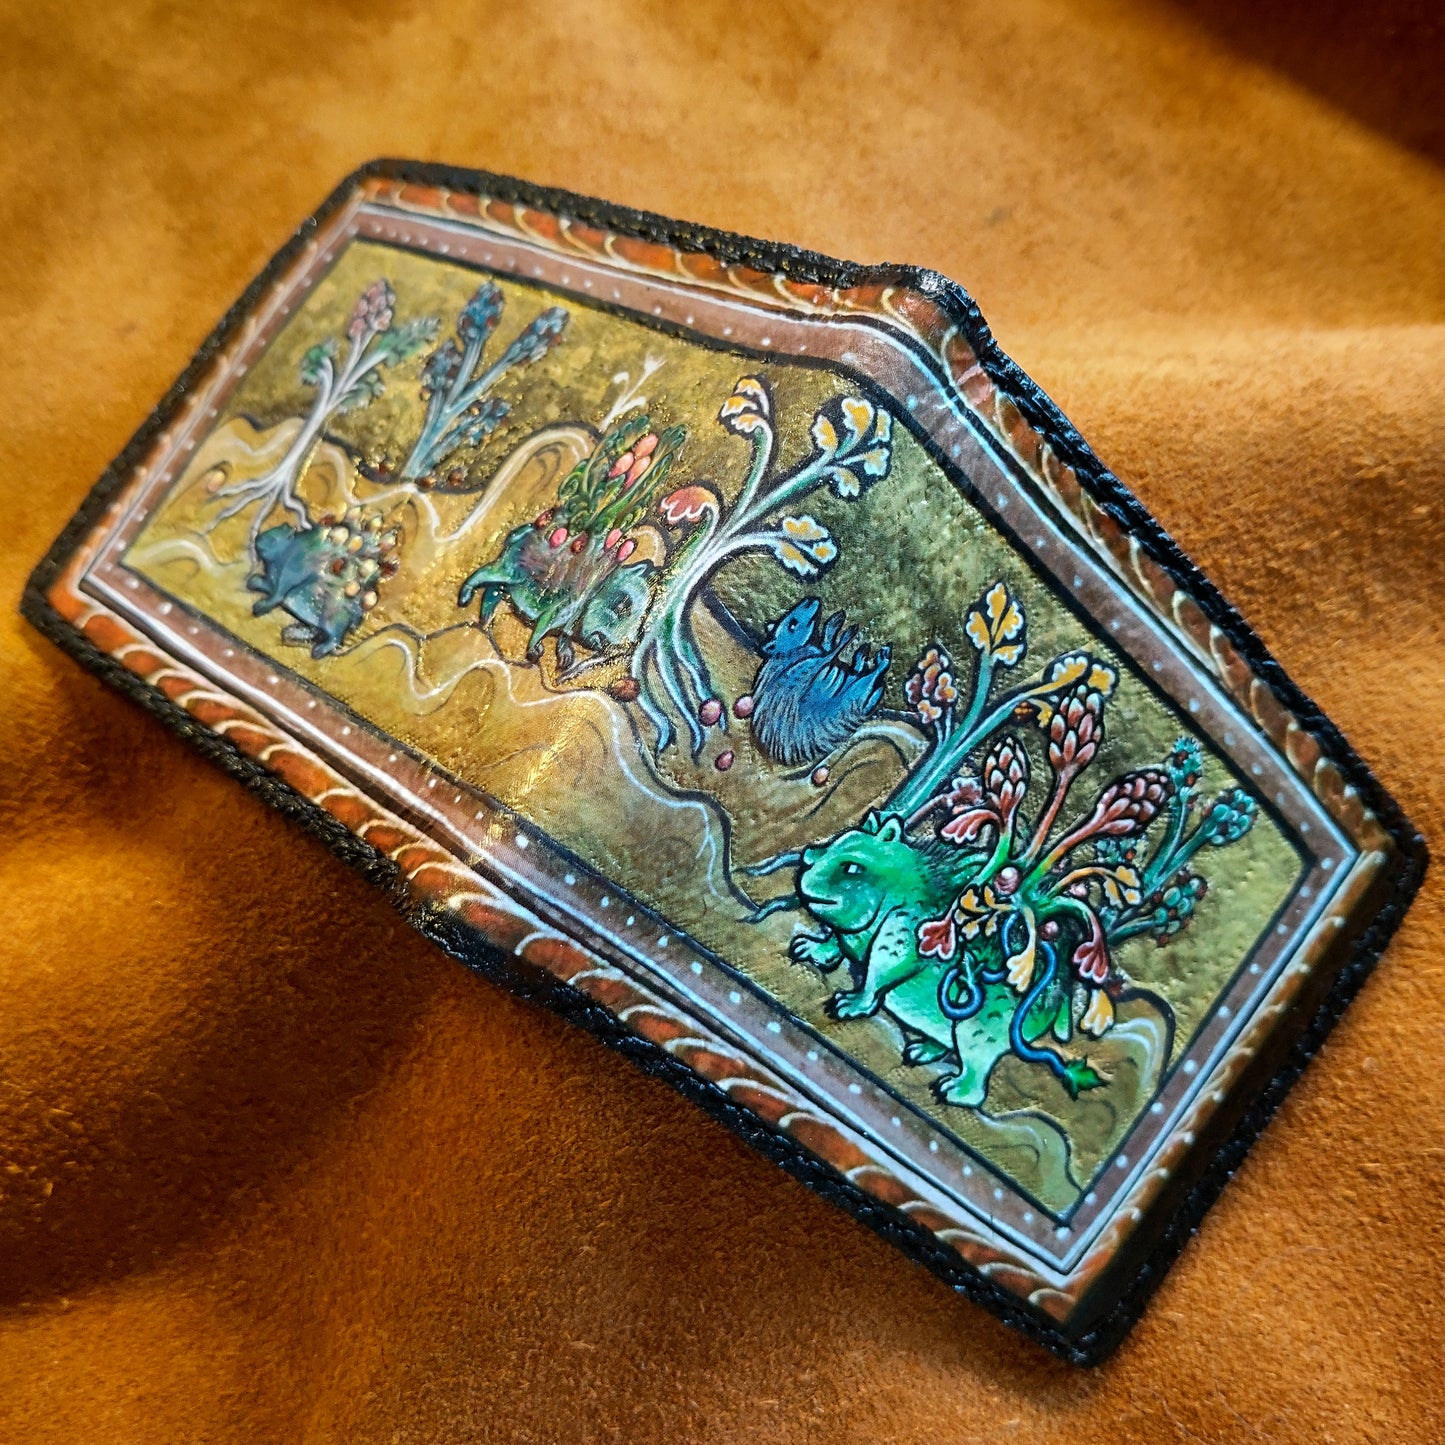 Medieval manuscript pokealchemy -3D textured surface - Hand stamped -Bulbasaur transmutations-evolutions  - Leather Wallet - Handcrafted